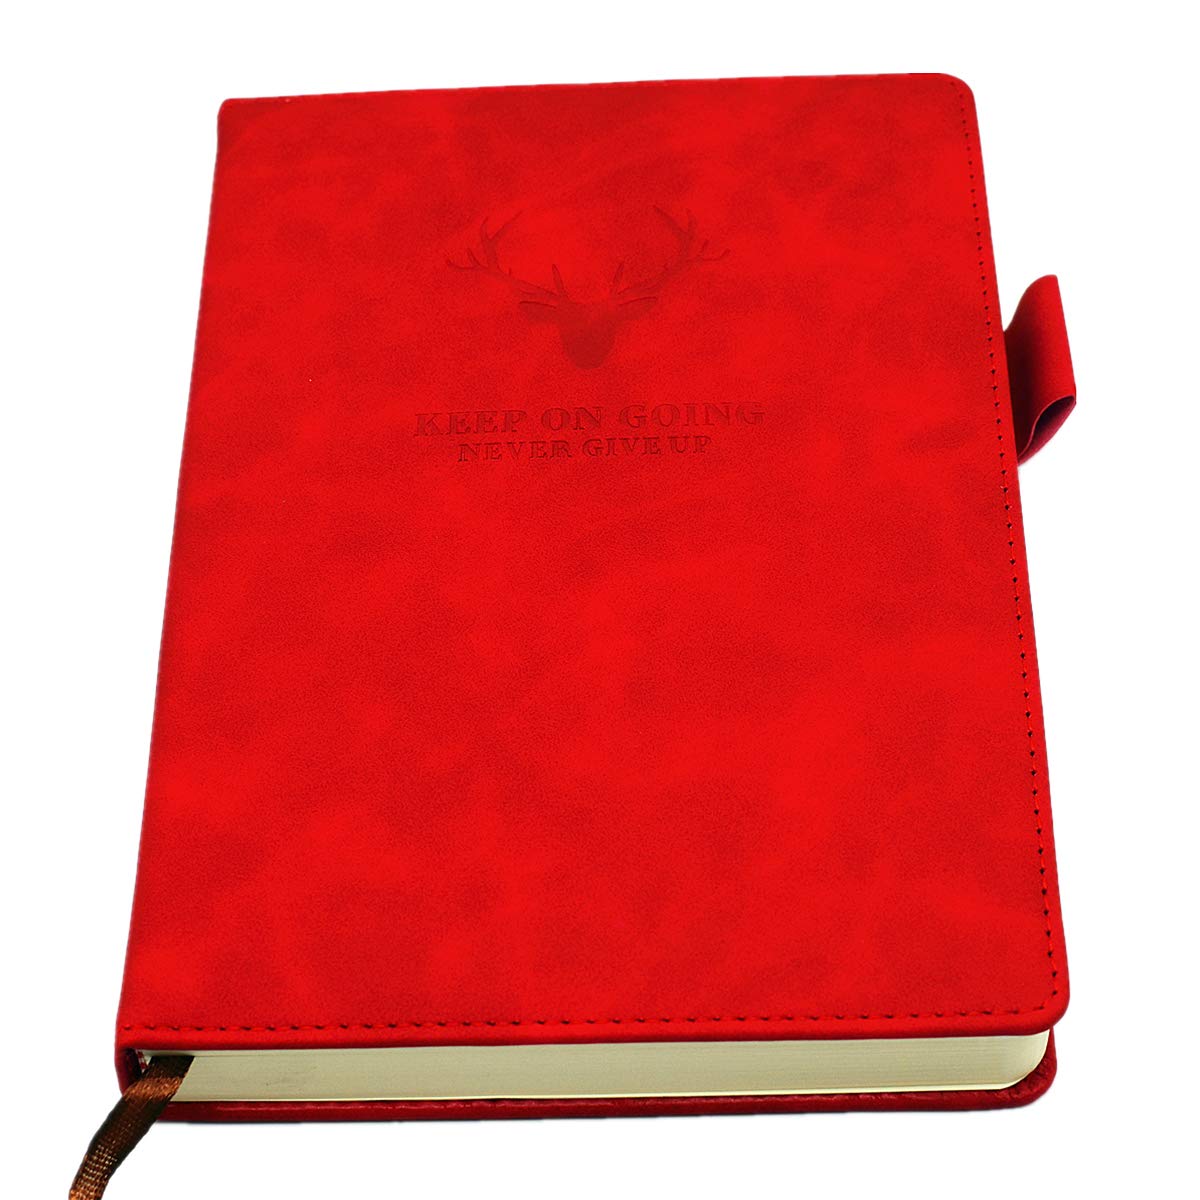 A5 Ruled Notebook Journal - Hardcover Executive Notebooks with Premium Thick Paper, College Lined Journal, 8.3 inches×5.7 inches,360 Page, Perfect for Office Home School Business Writing & Note Taking (Red)